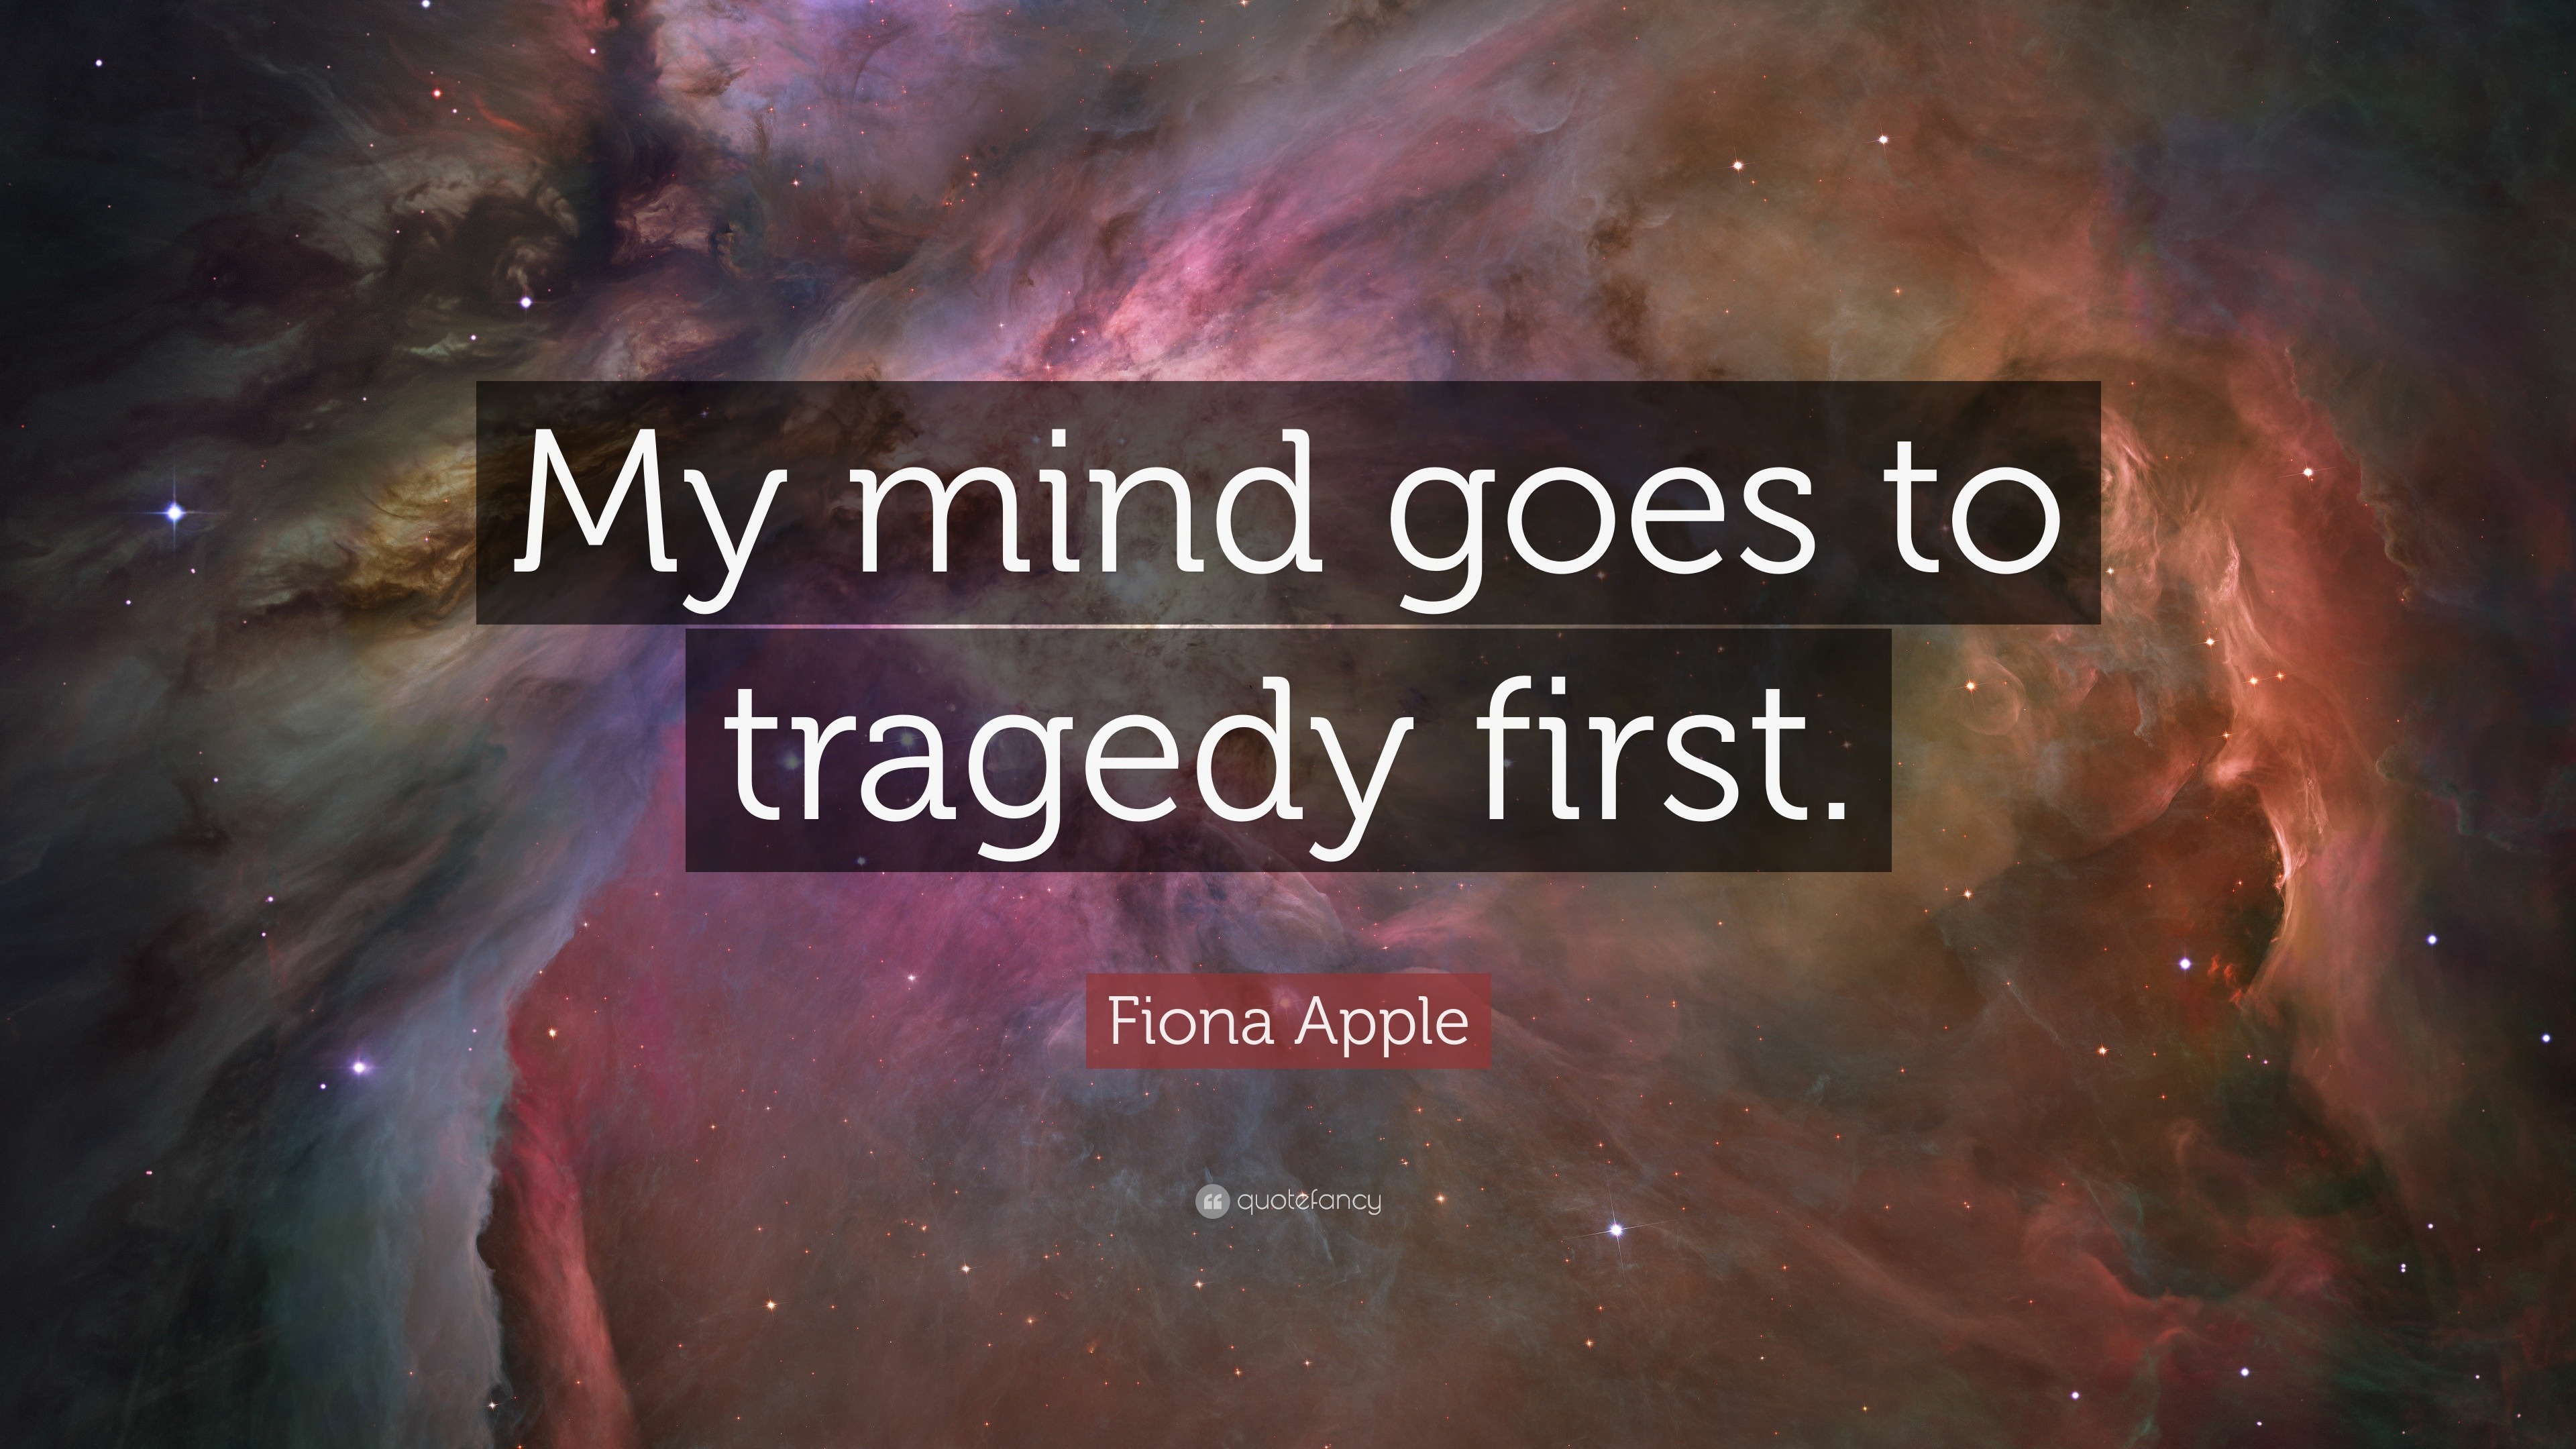 Fiona Apple Quote “My mind goes to tragedy first.”